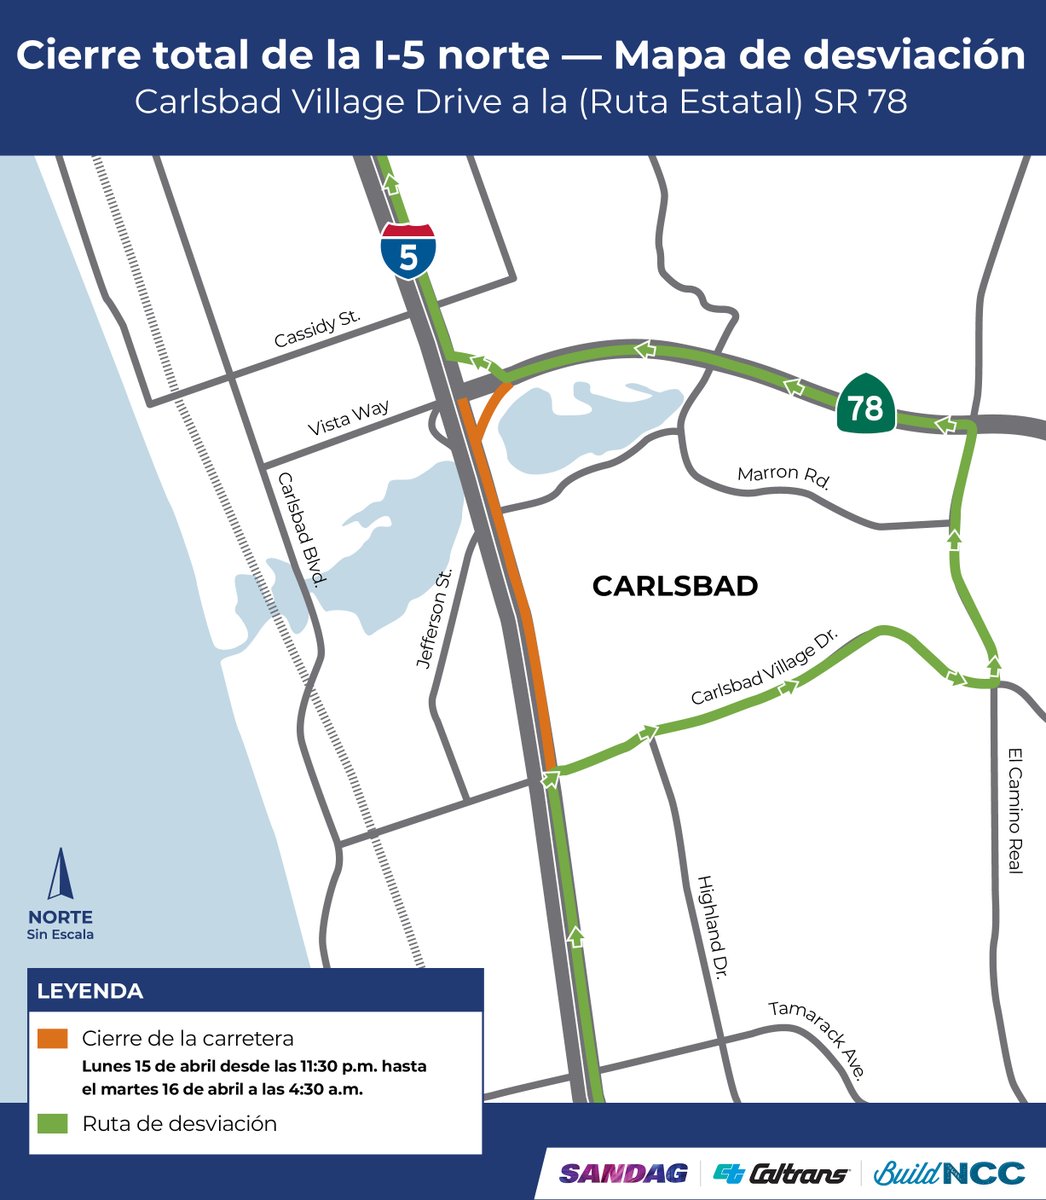 🚧 SANDAG & @SDCaltrans Build NCC crews will close all northbound I-5 lanes from Carlsbad Village Drive to SR 78 from 11:30 p.m. on Monday, April 15 to 4:30 a.m. on Tuesday, April 16 to resume placement of an overhead sign structure in @CarlsbadCAGov.